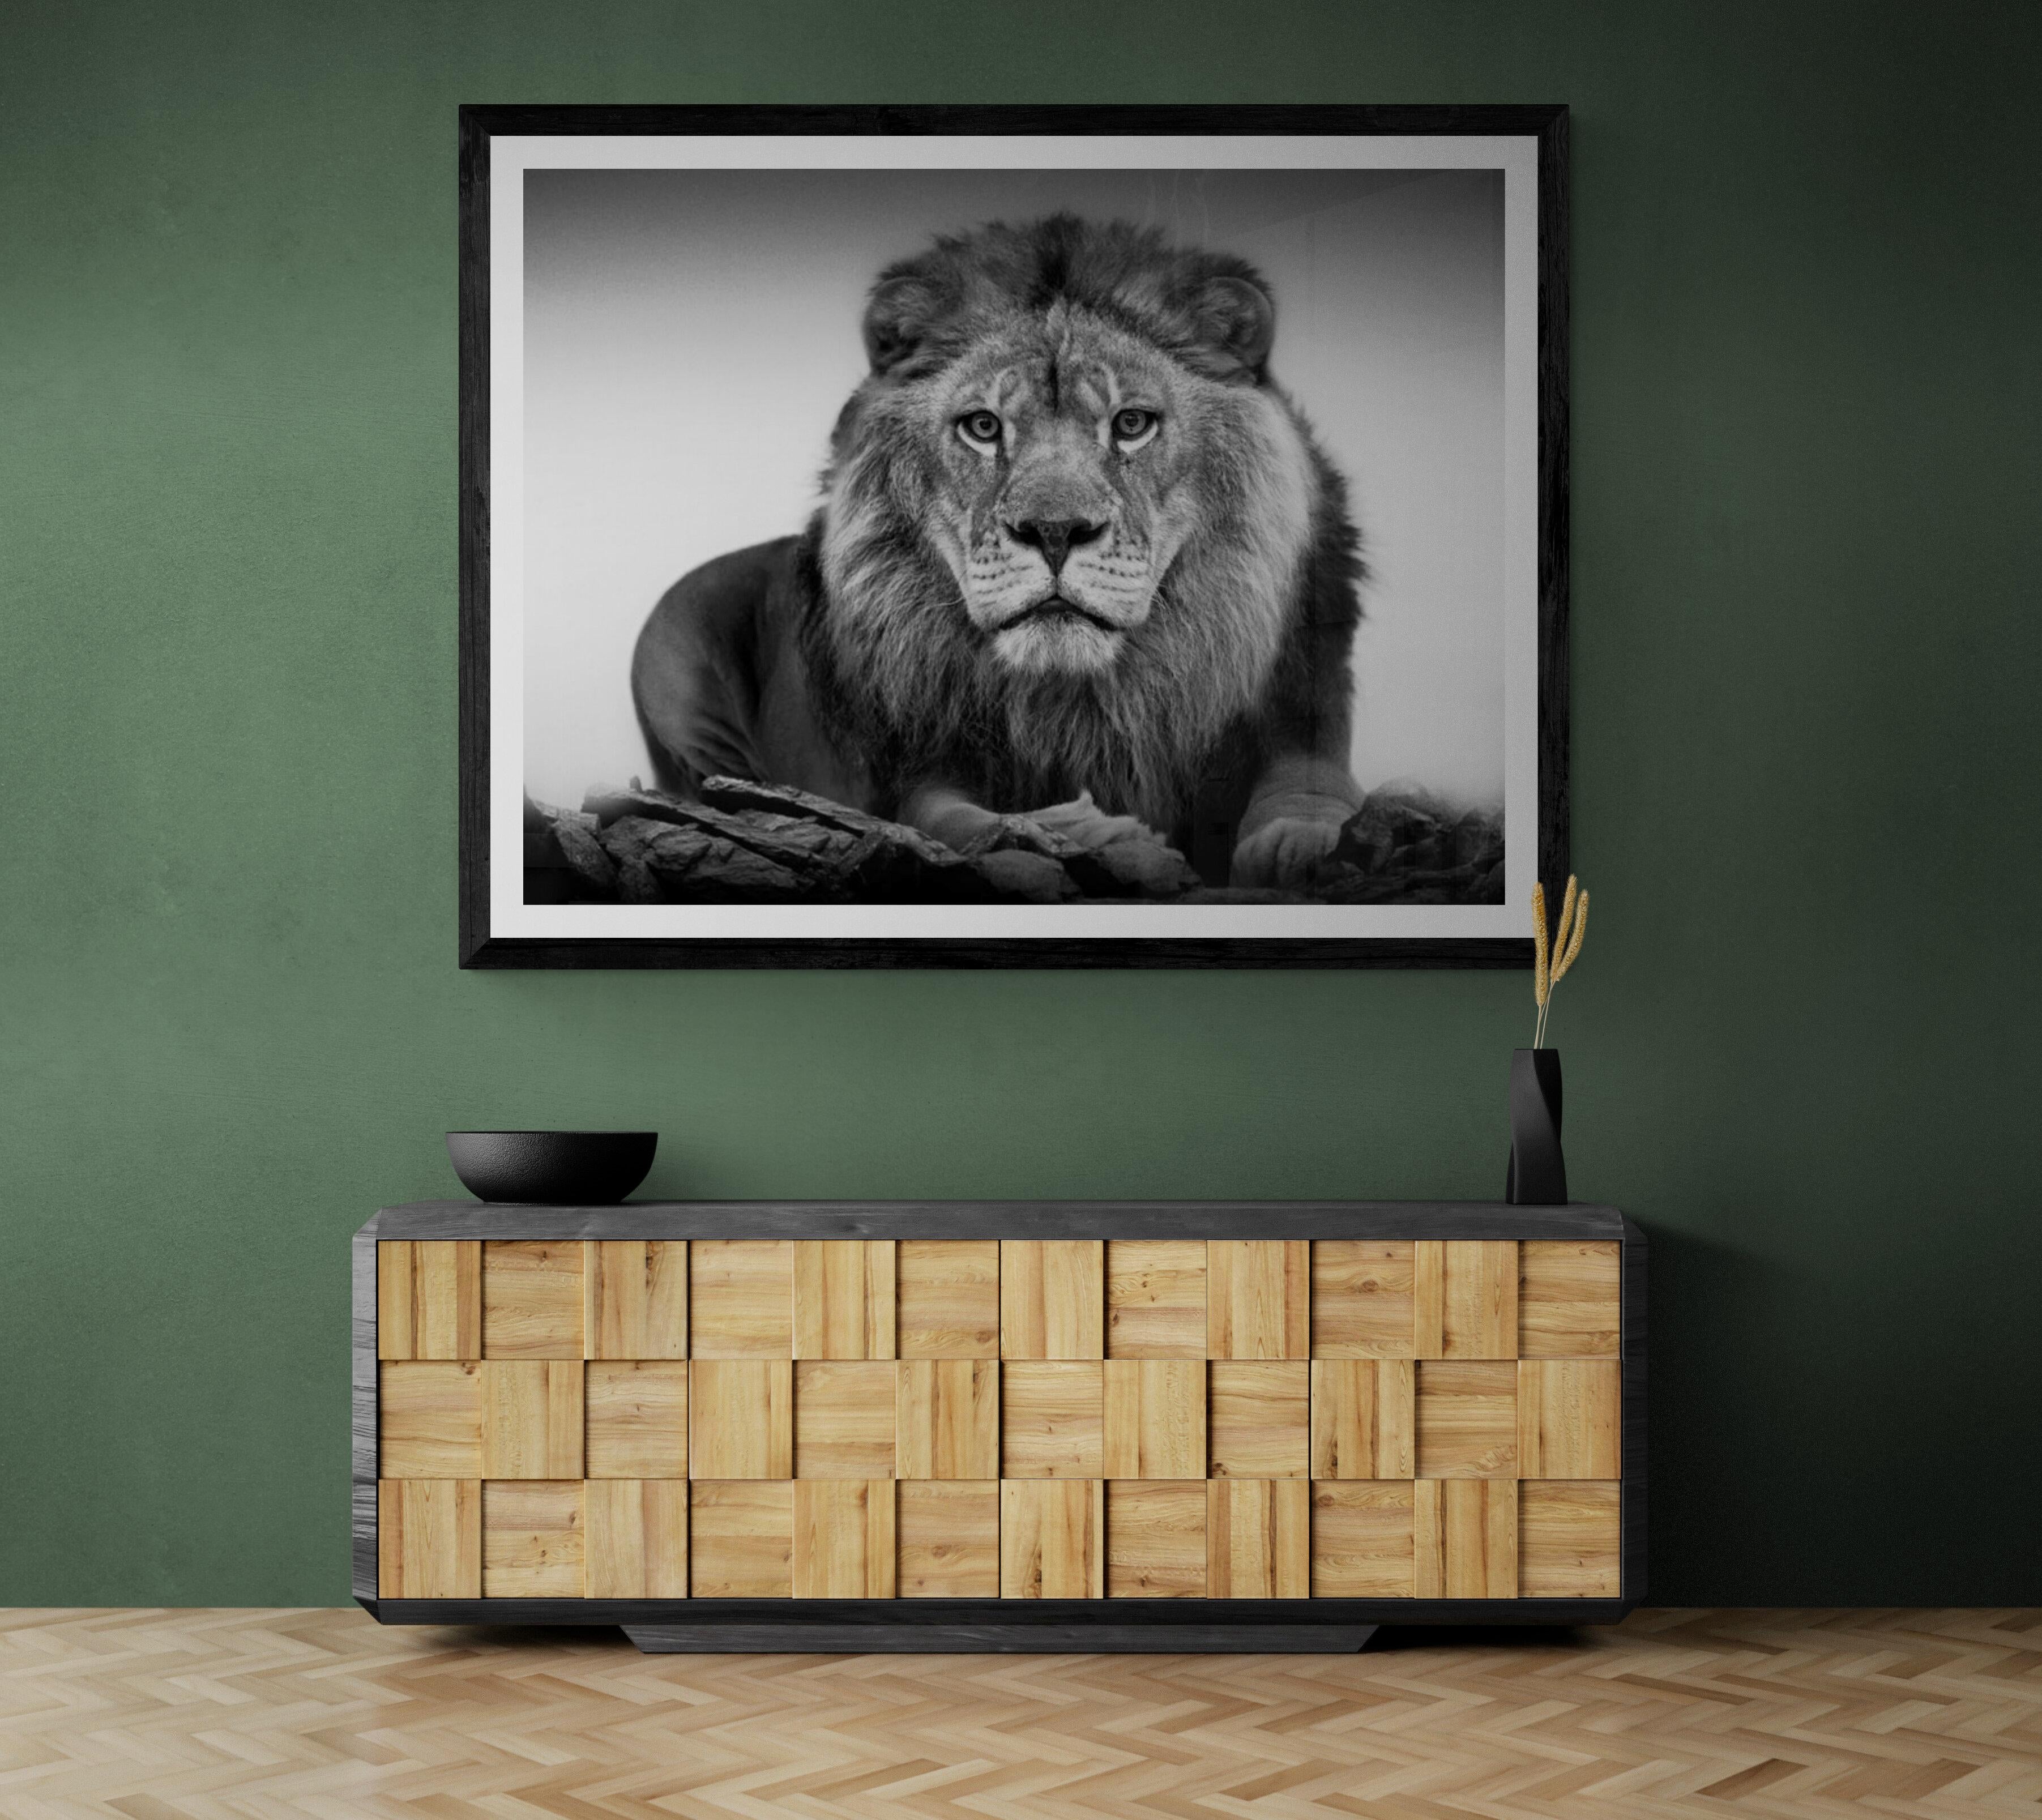 This is a contemporary photograph of an African Lion. 
40x60
Singed and Numbered
Archival Pigment print.
Framing available. Inquire for rates. 

FREE SHIPPING

Shane Russeck has built a reputation for capturing America's landscapes, cultures and